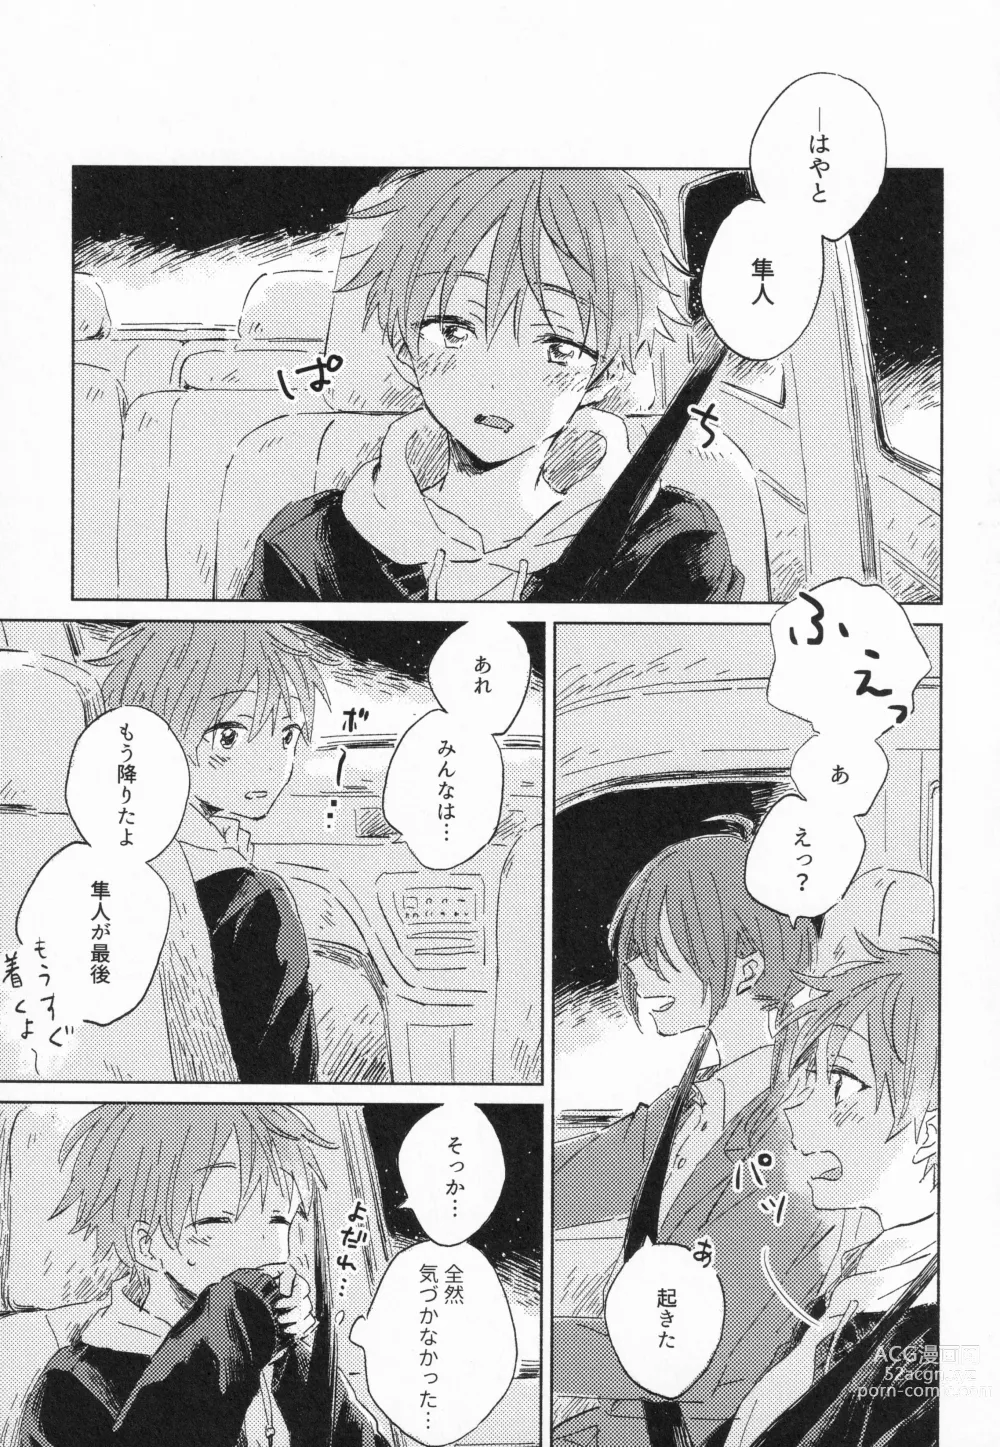 Page 6 of doujinshi 21-ji ni Machiawase - On the stroke of 9pm, the spell will be broken